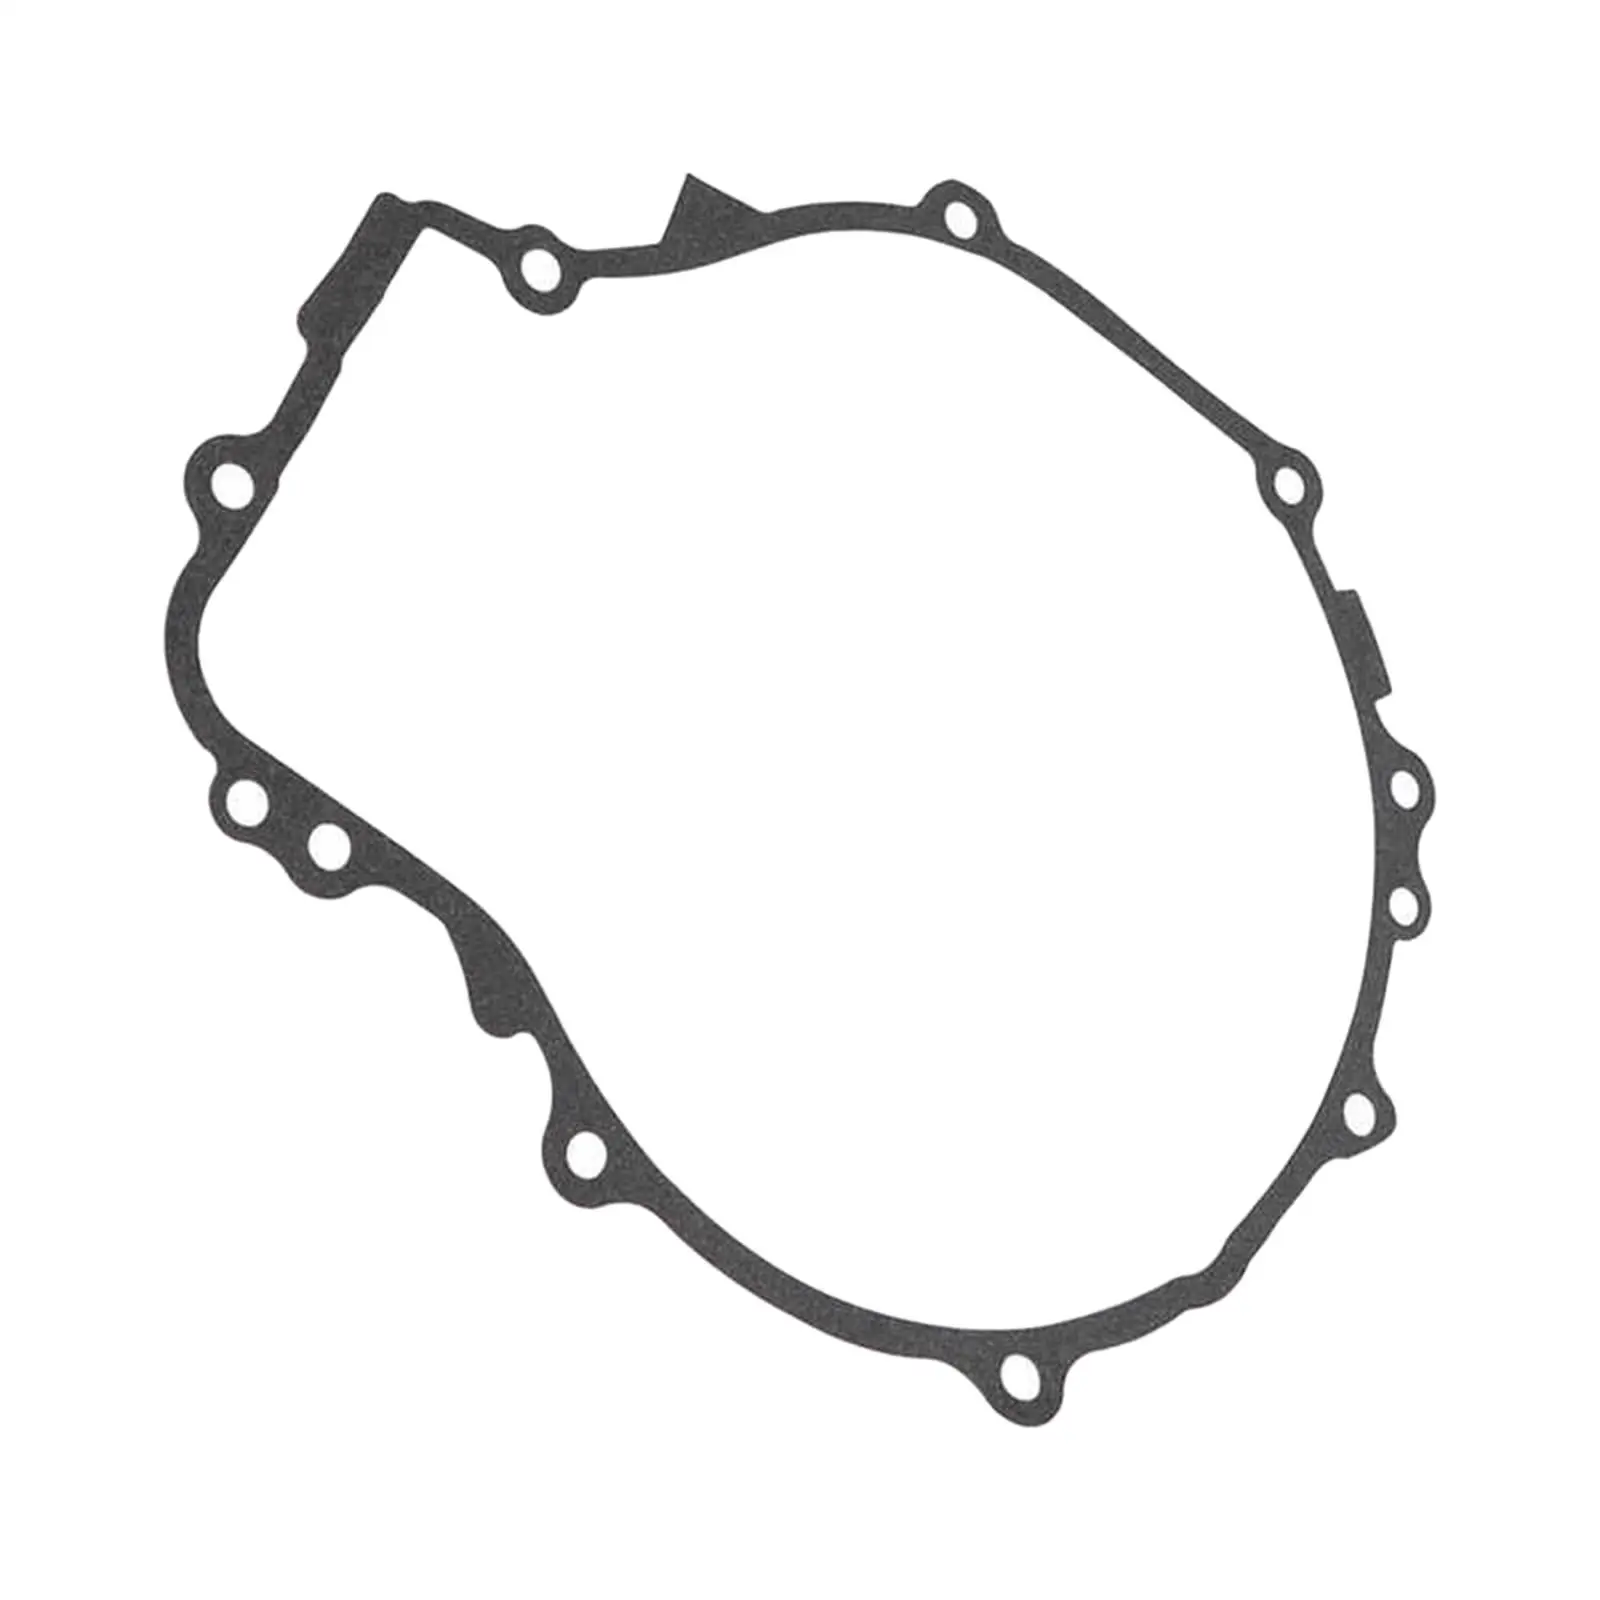 Vehicle Pull Start Gasket 3084933 for Polaris Sportsman 500 1996?2011 Replace Parts